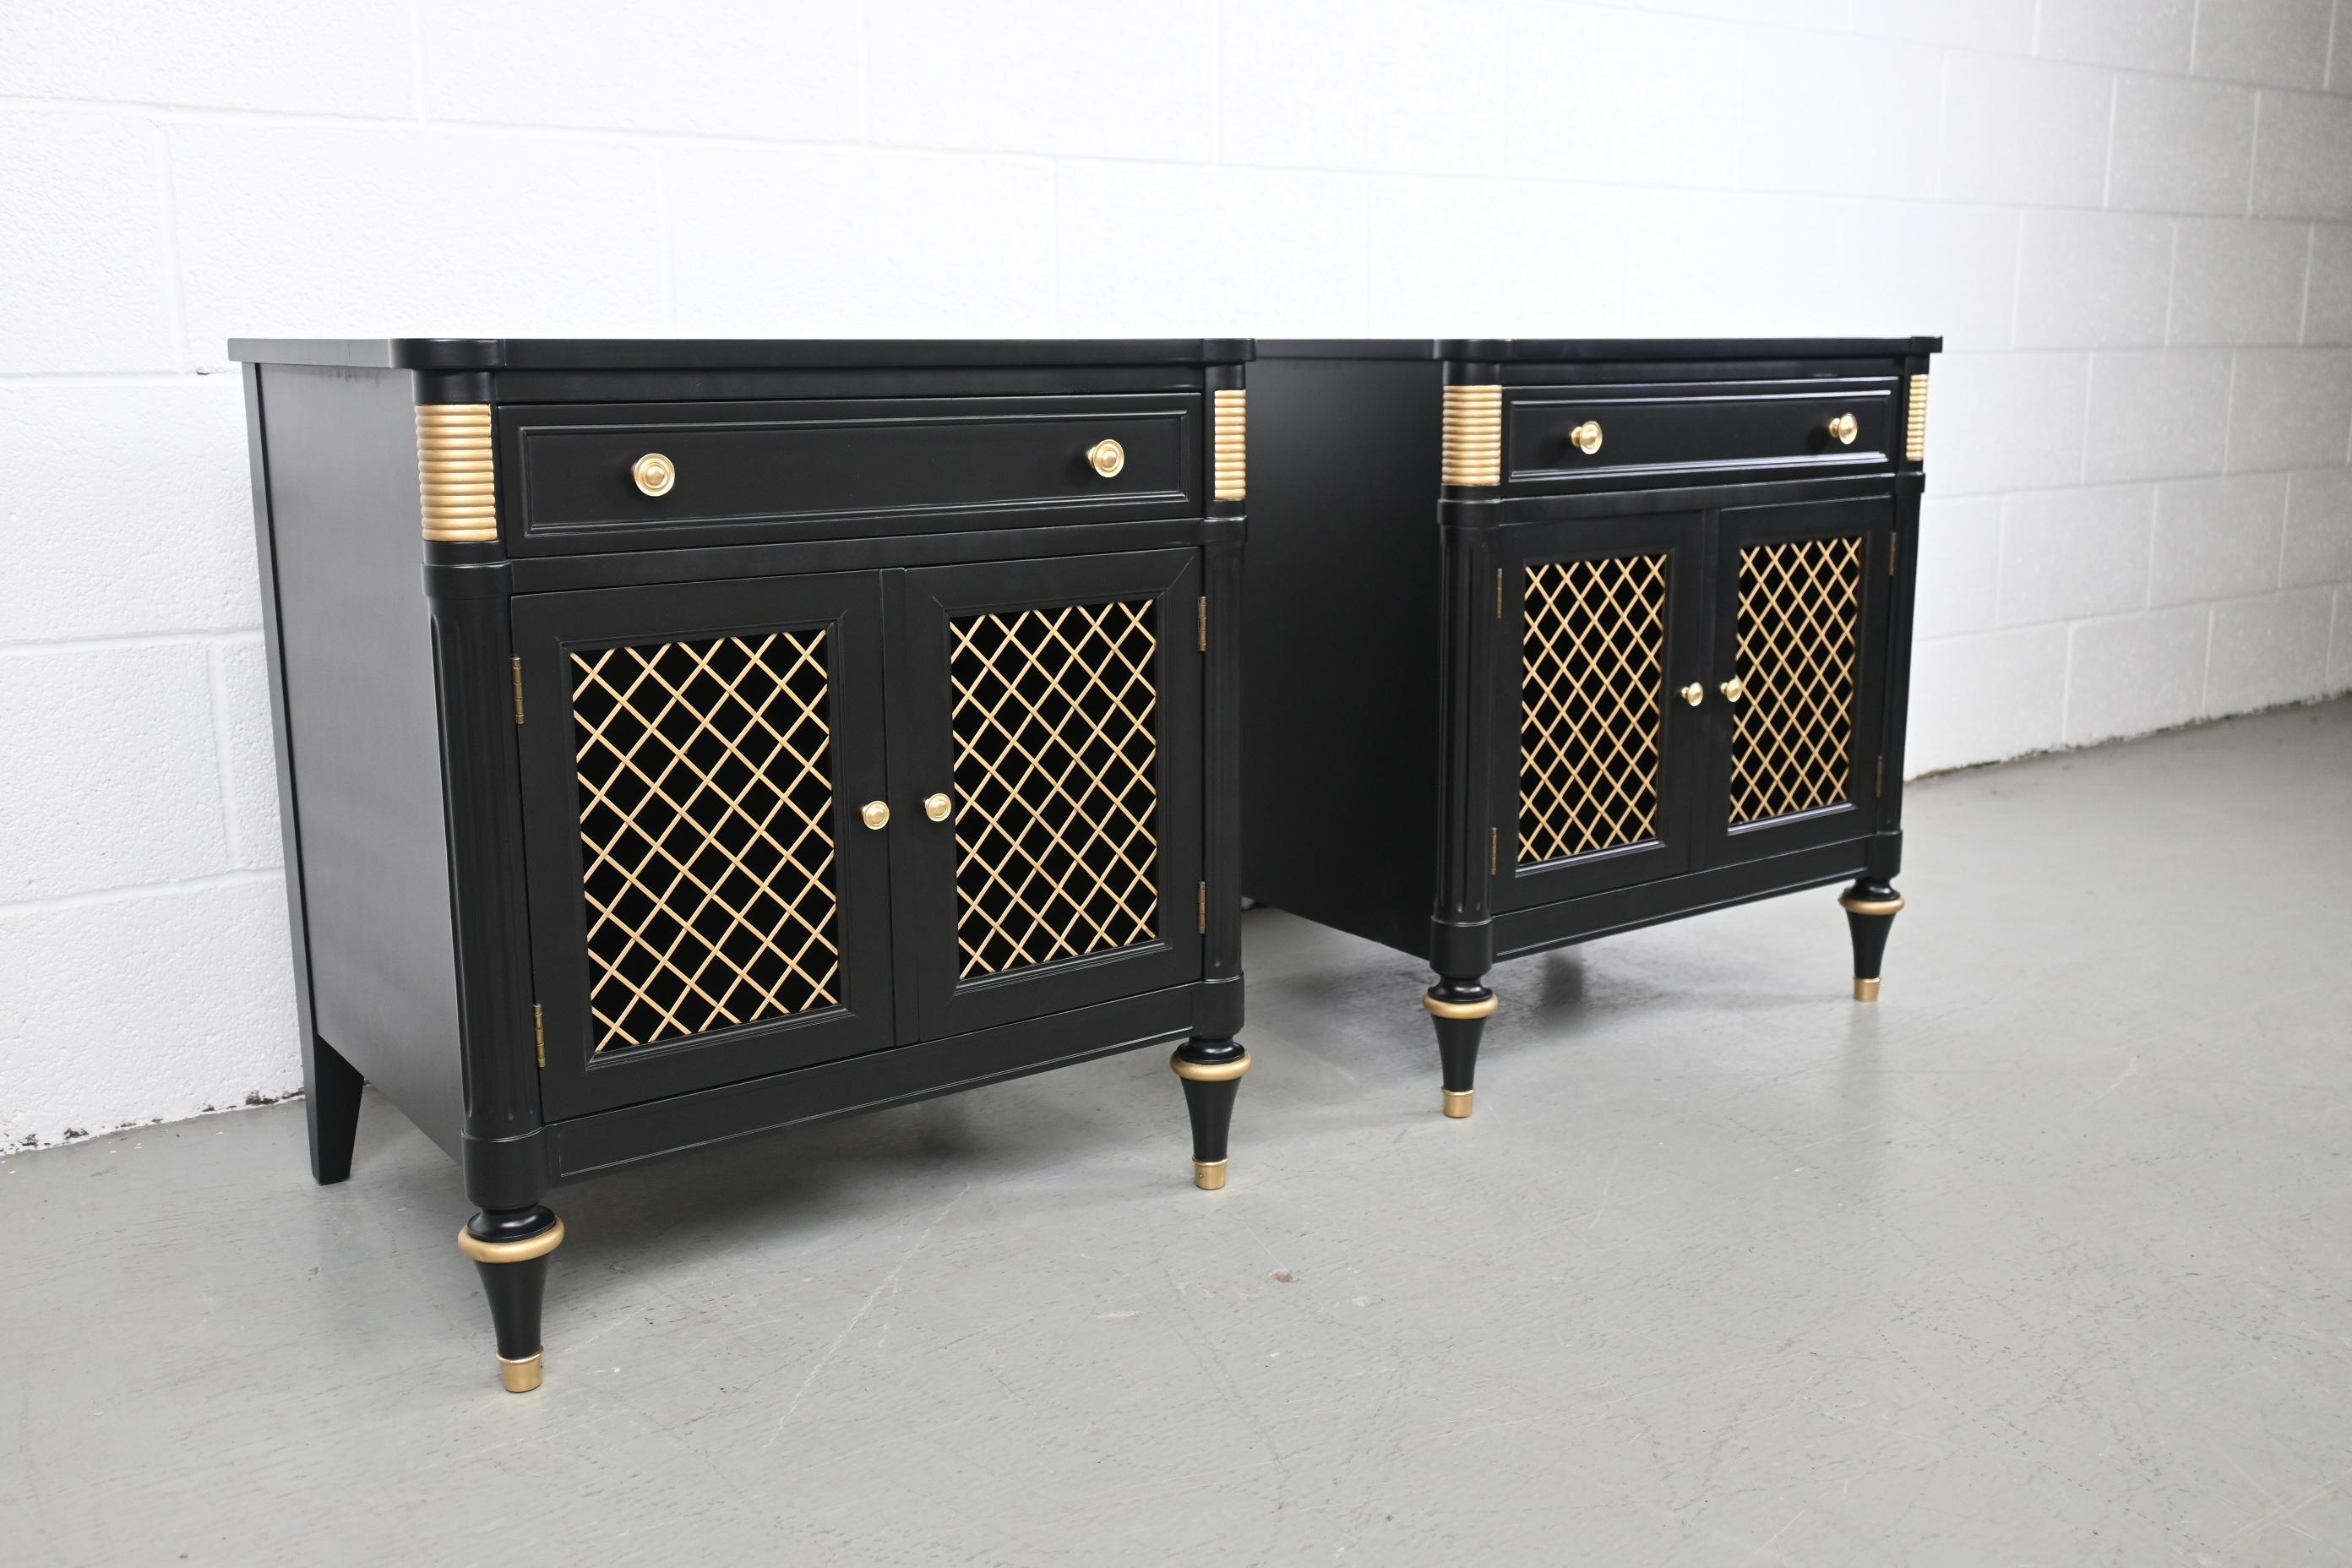 Kindel Furniture French Regency Black Lacquered Pair of Nightstands

Kindel Furniture, USA 1970s

Size: 23.75 Wide x 17.88 Deep x 25.13 High.

French regency style black lacquered nightstands with gold accents.

Professionally refinished.